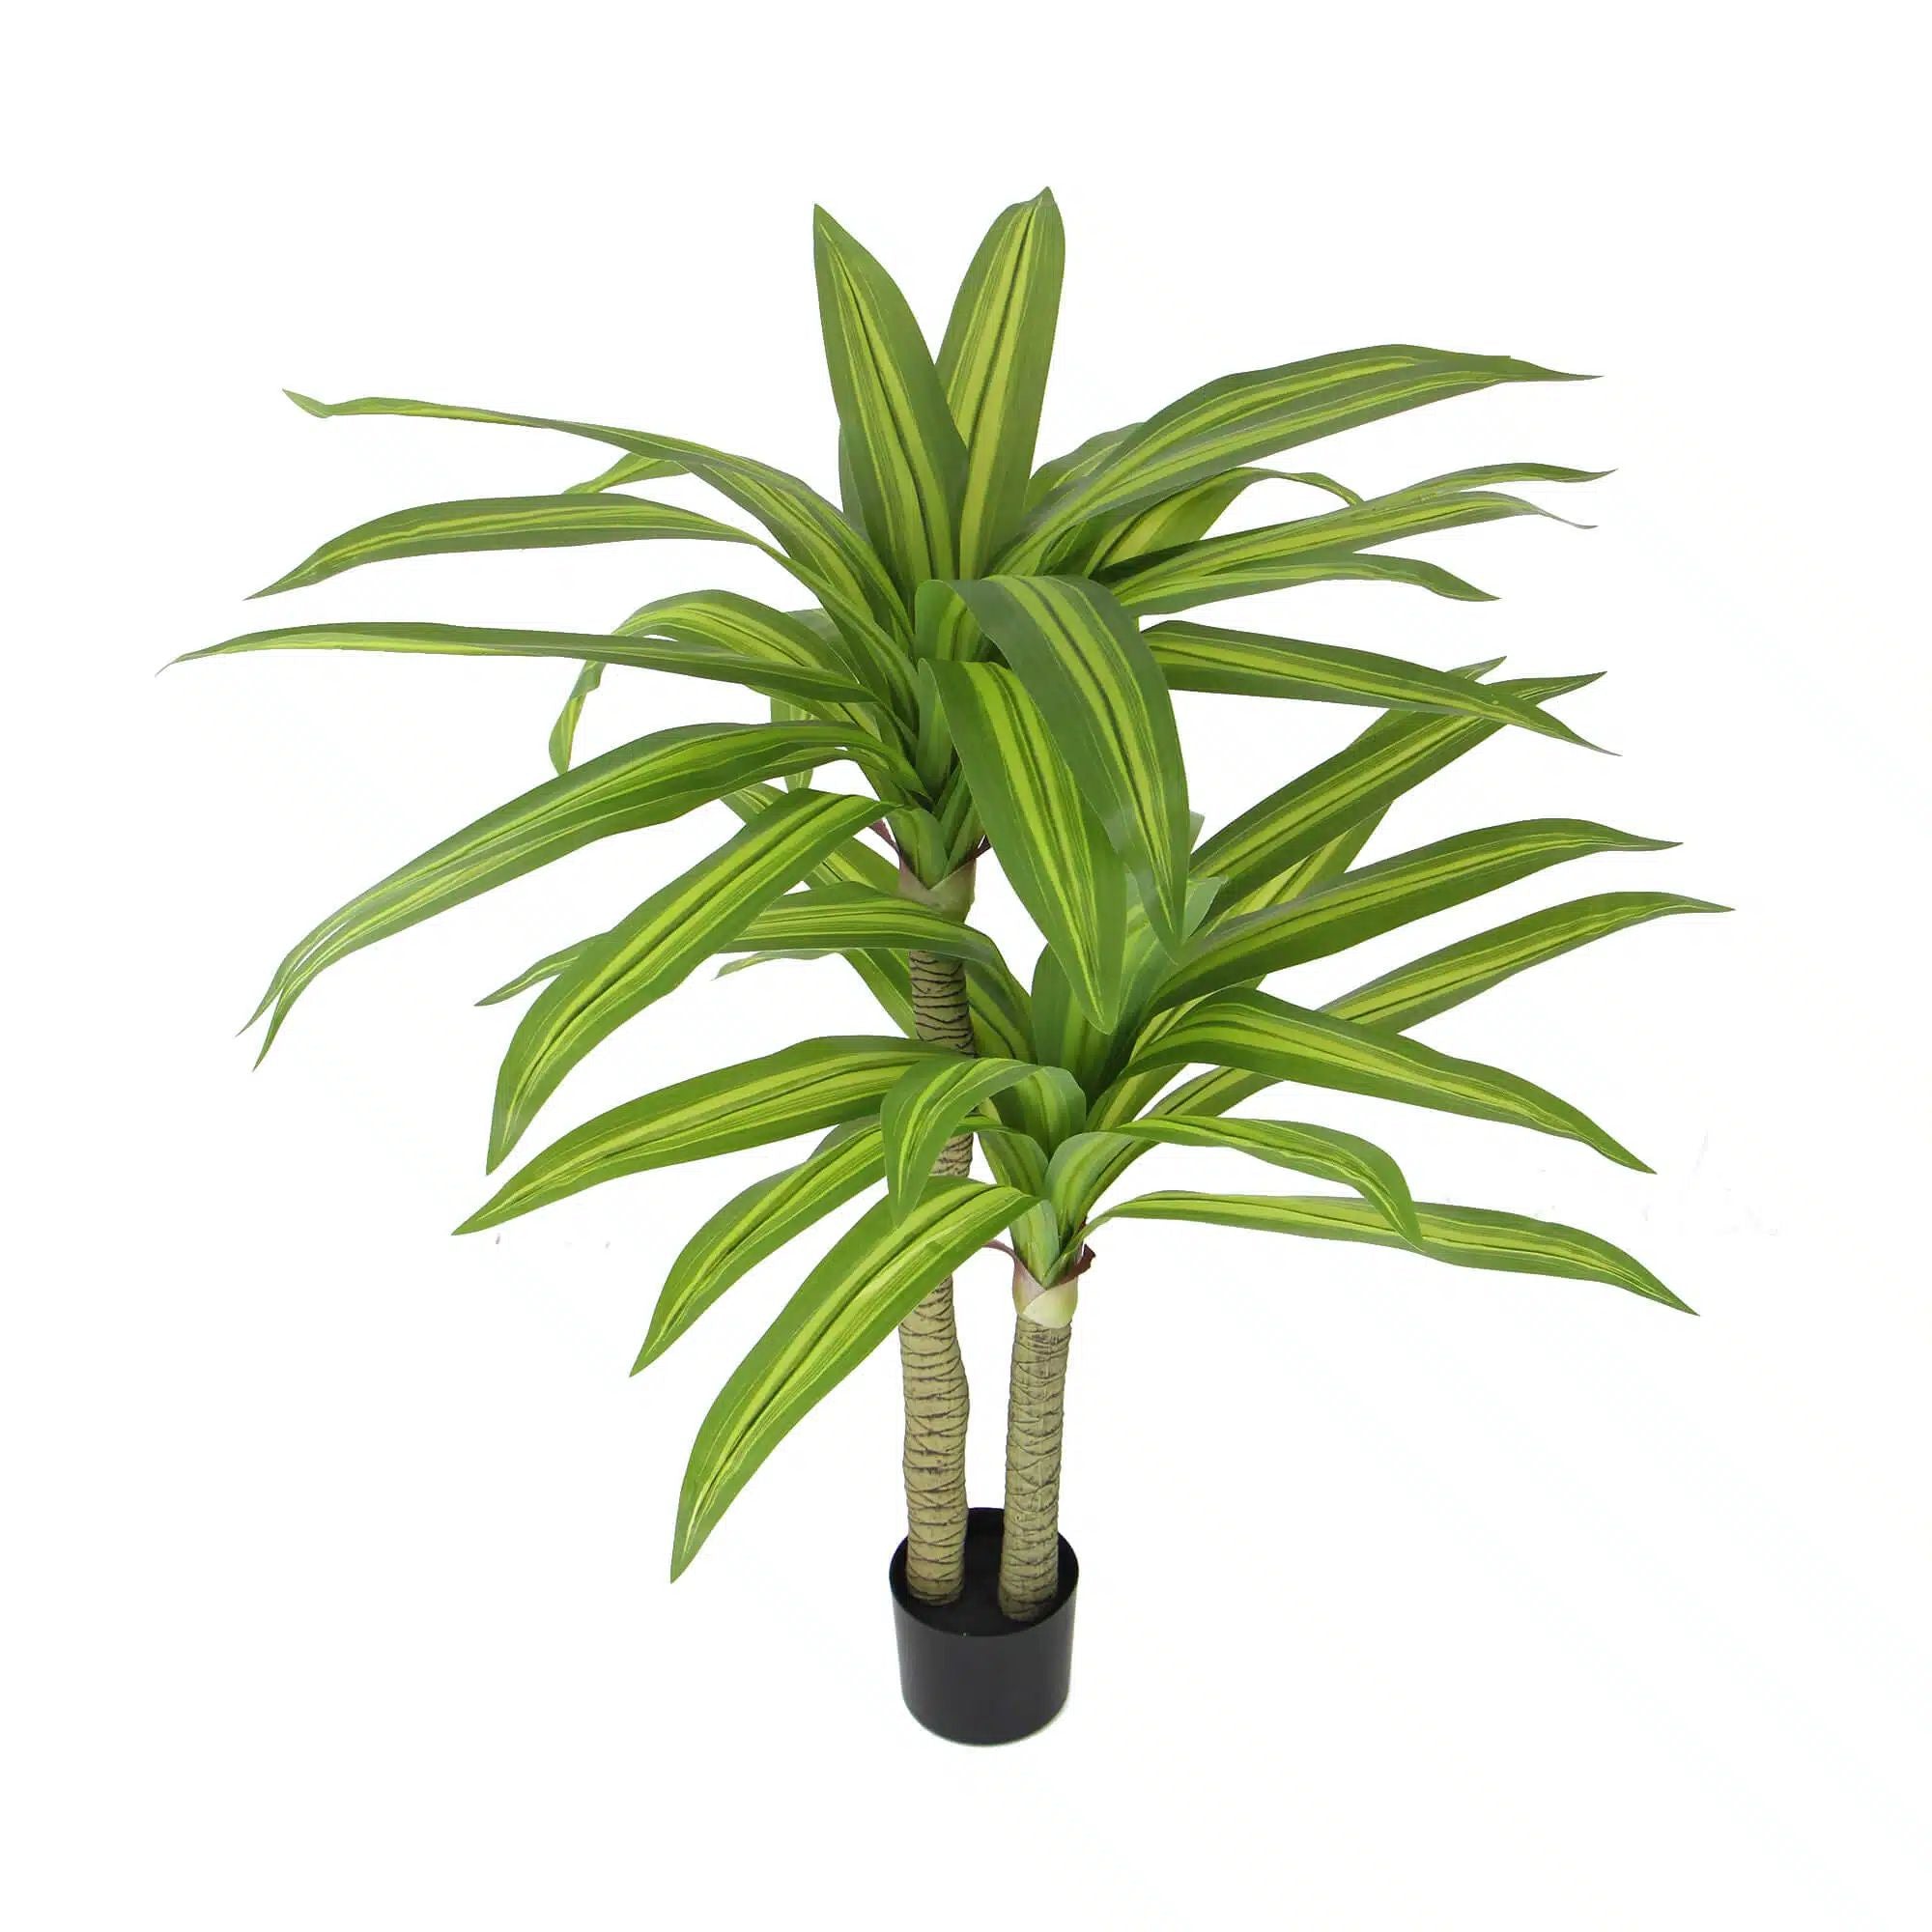 Artificial Multi Head Dracaena Tree With Mixed Green Leaves (Real Touch) 130cm